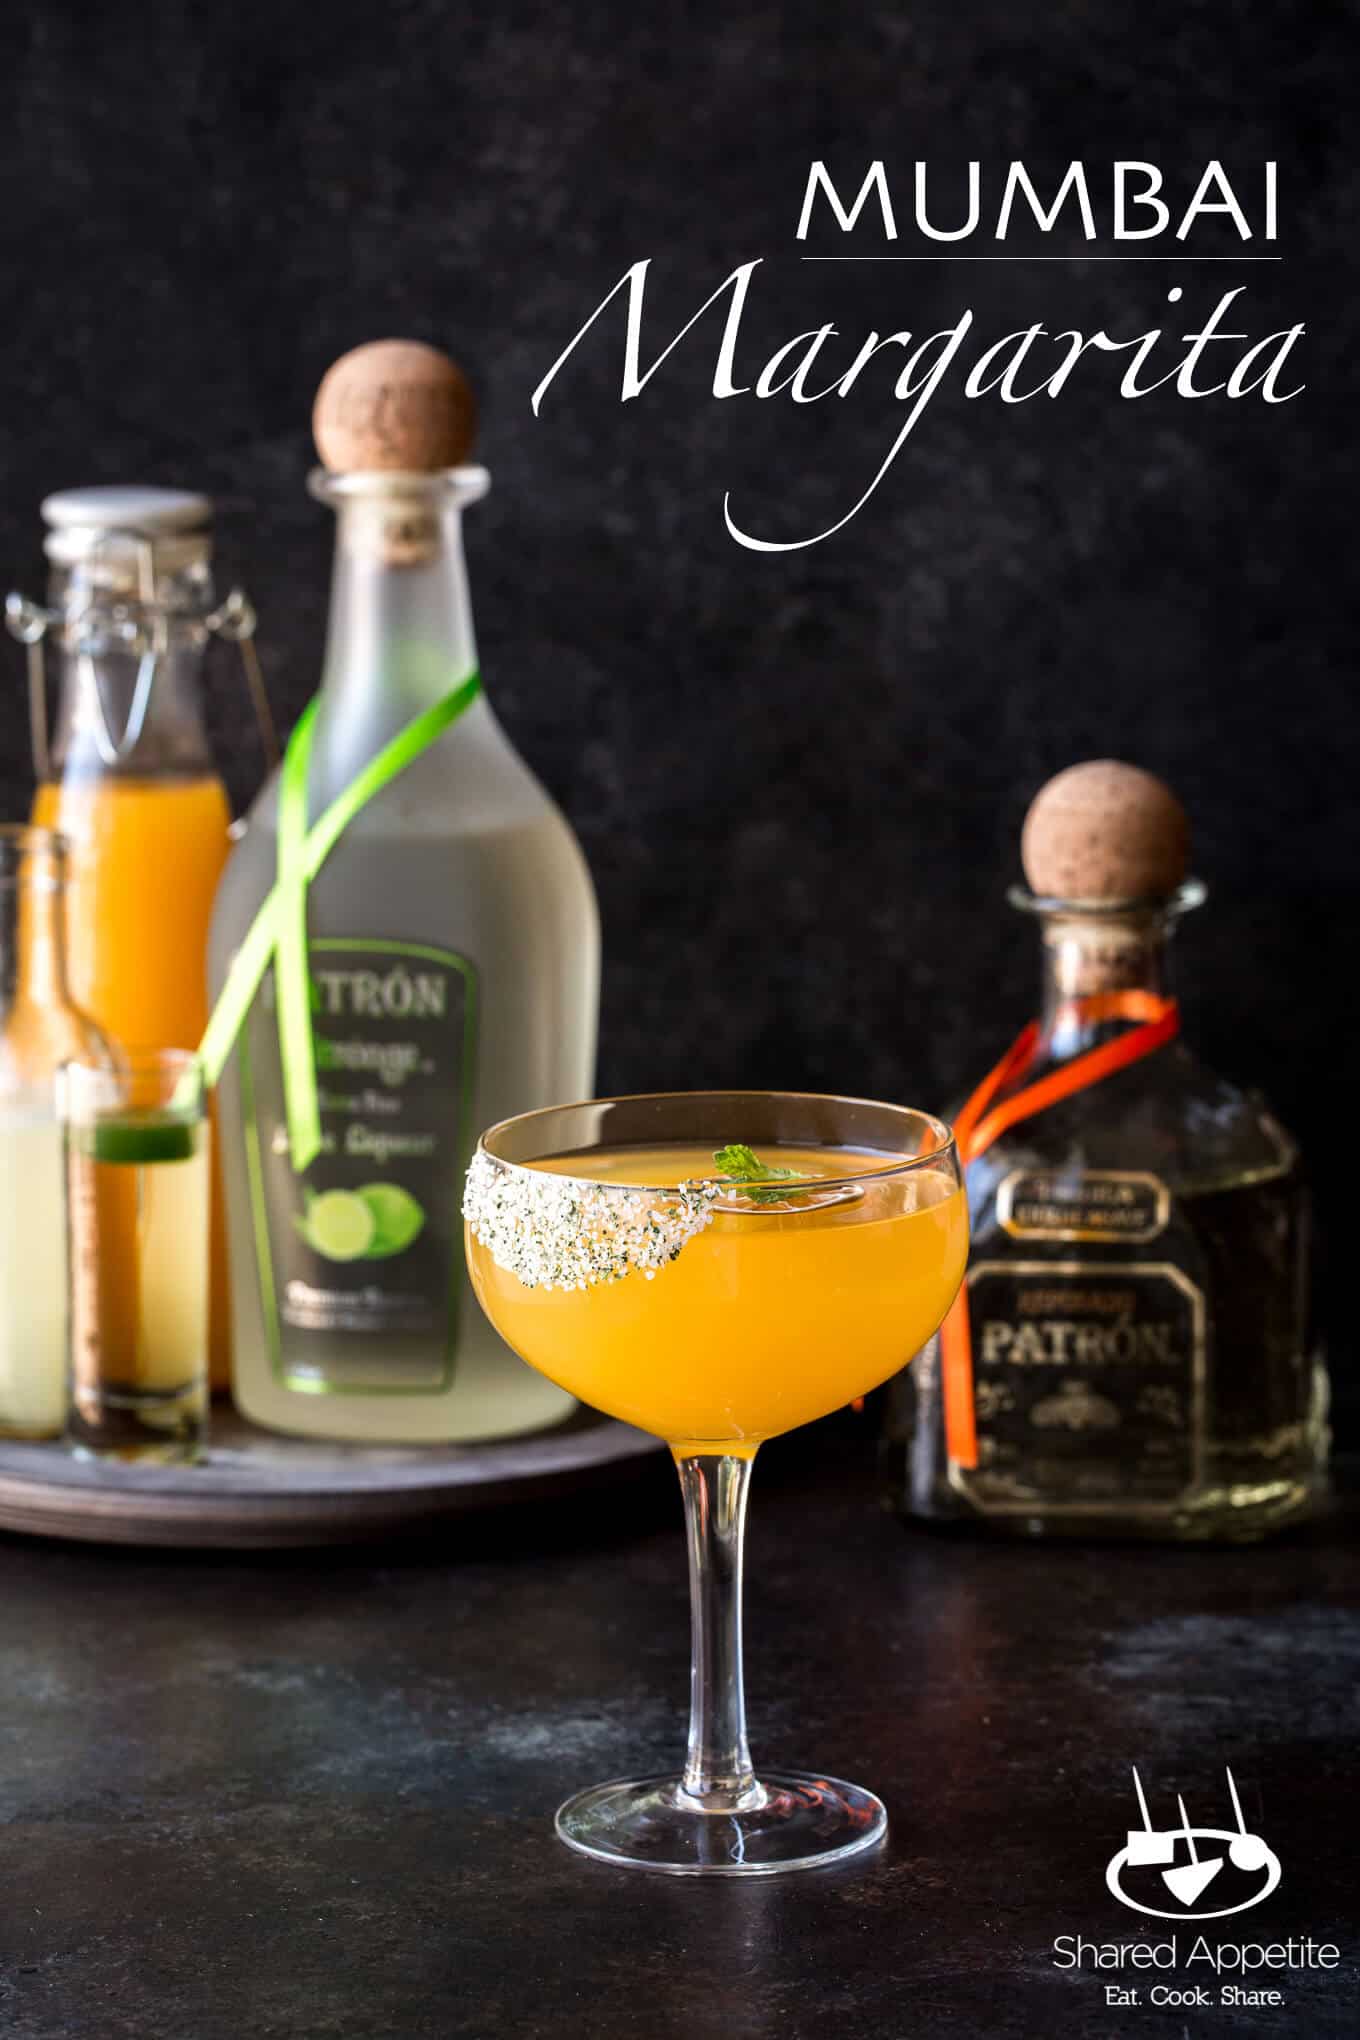 Mumbai Margarita inspired by the flavors of India with Patron tequila, mango puree, spicy rose water syrup, and lots of lime! sharedappetite.com